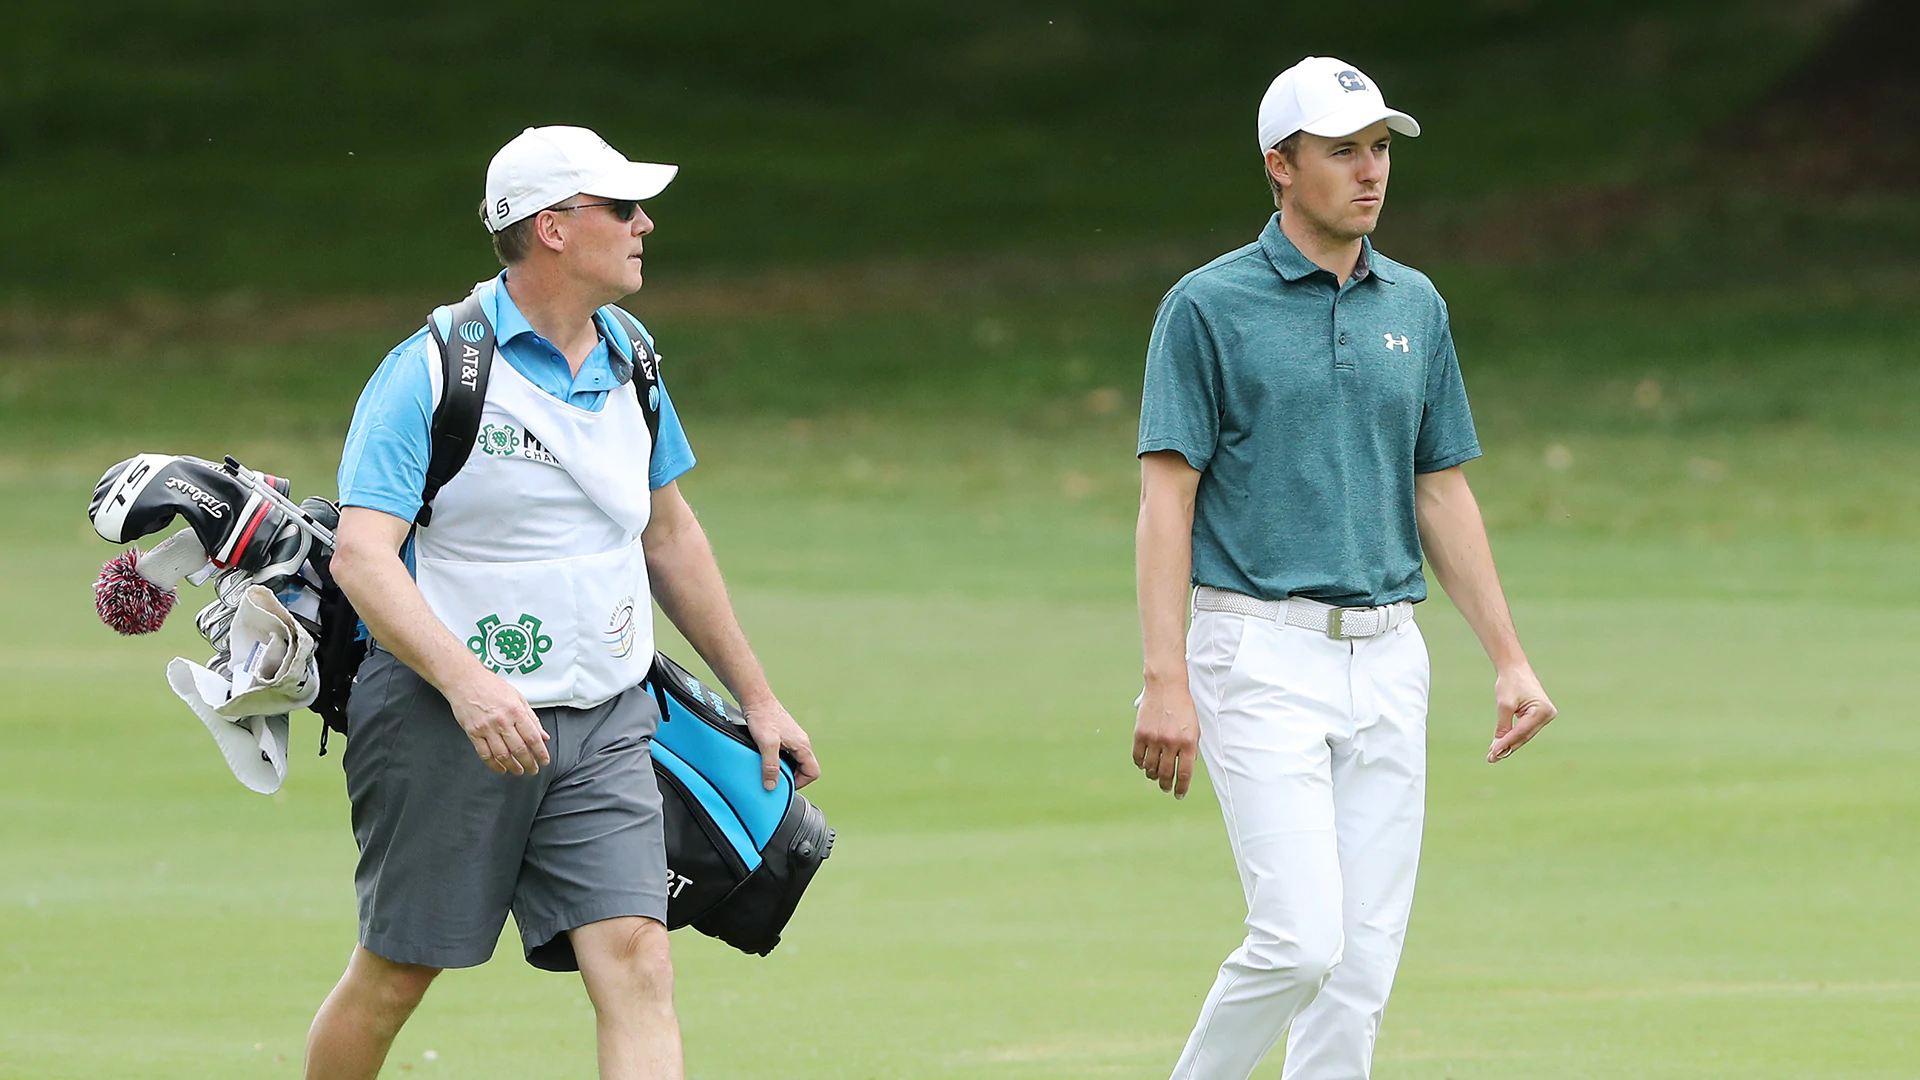 Jordan Spieth thinking of grieving Michael Greller: ‘Been through a lot together’